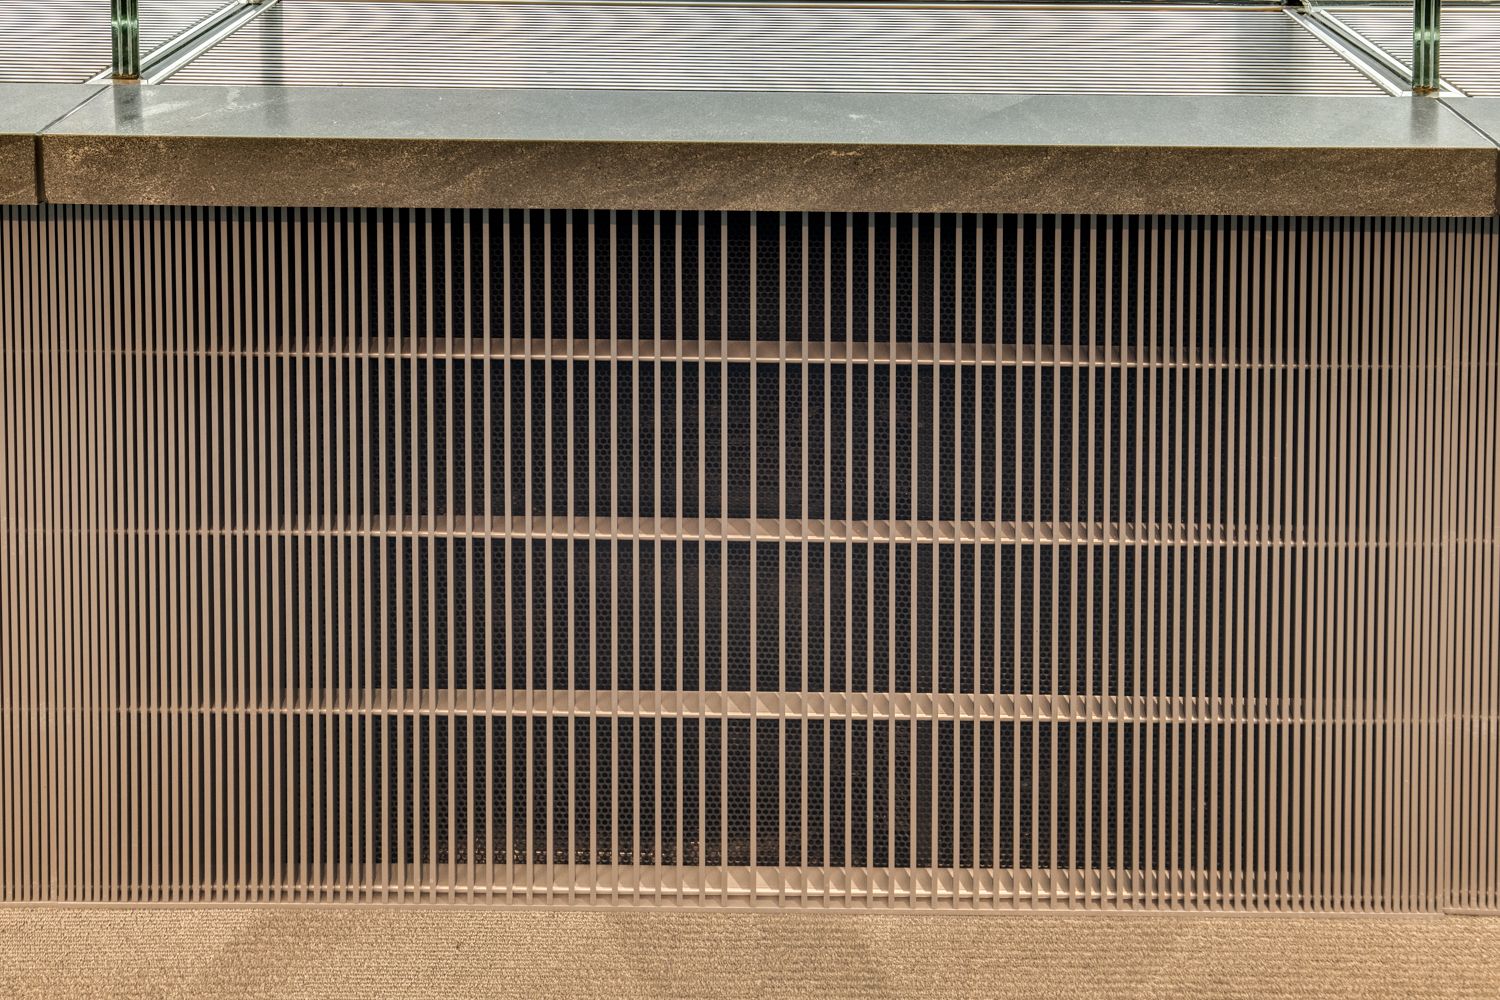 Wall and Ventilation Grilles - VCU